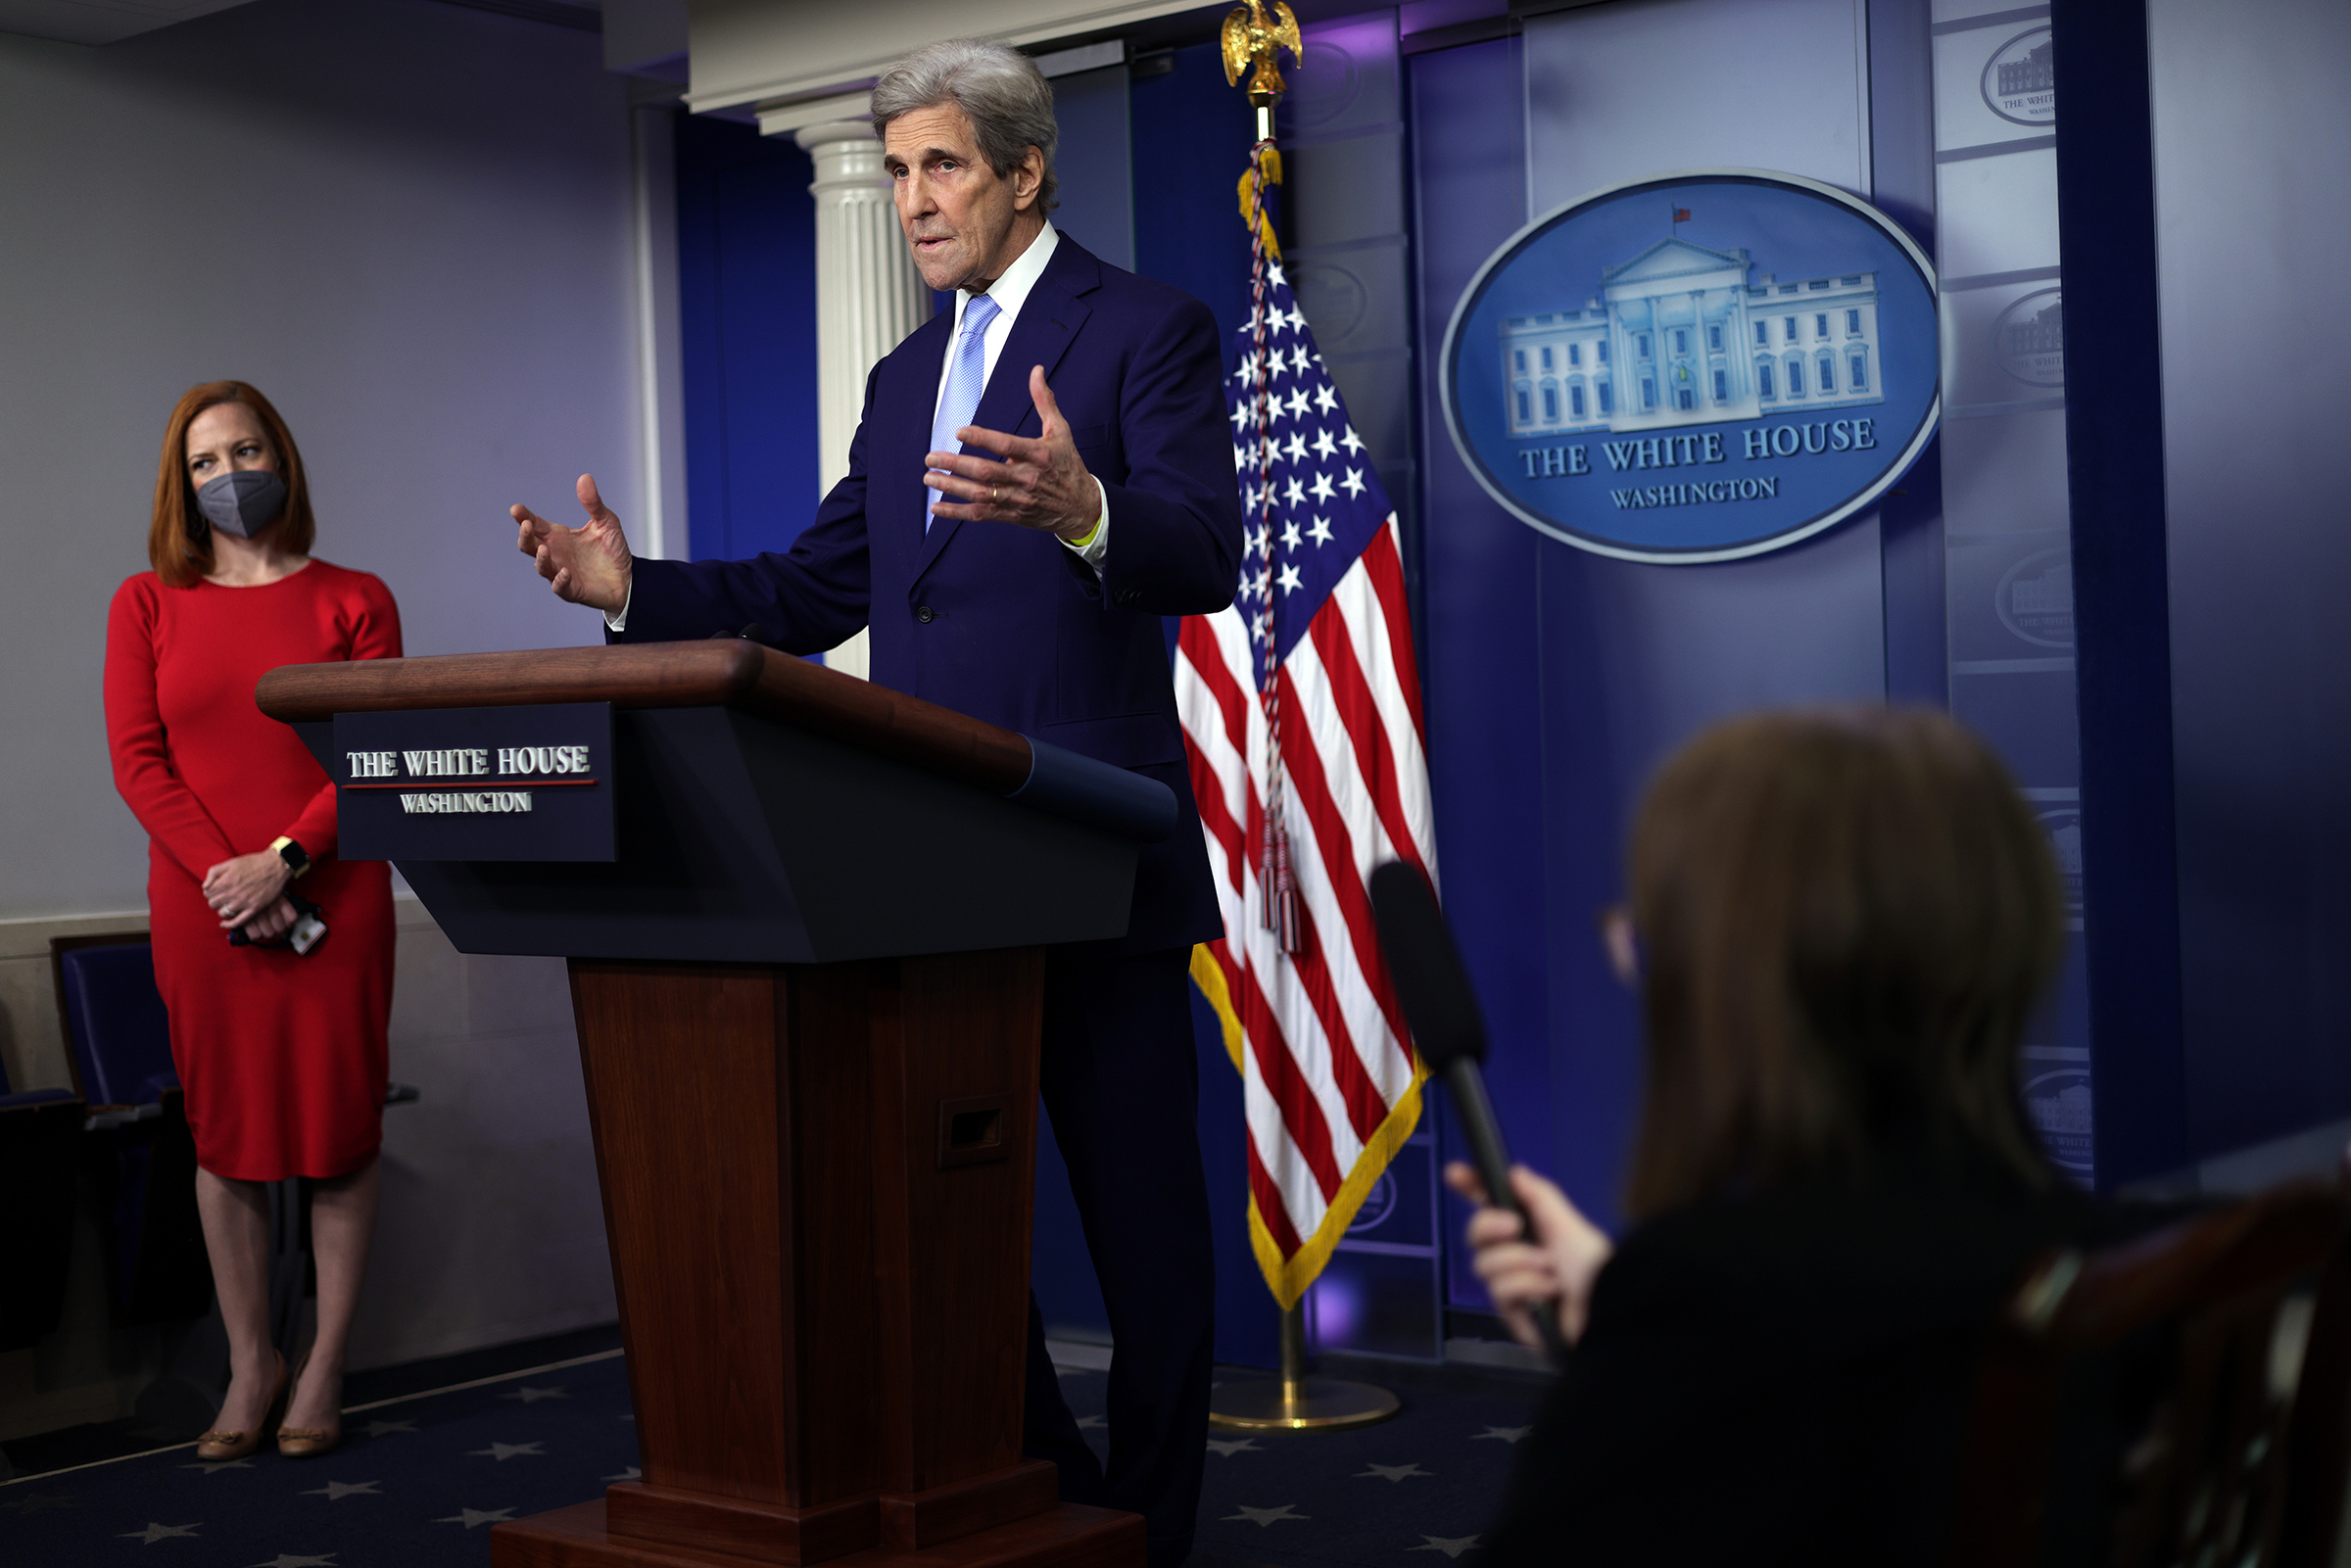 Kerry addressing the White House press corps